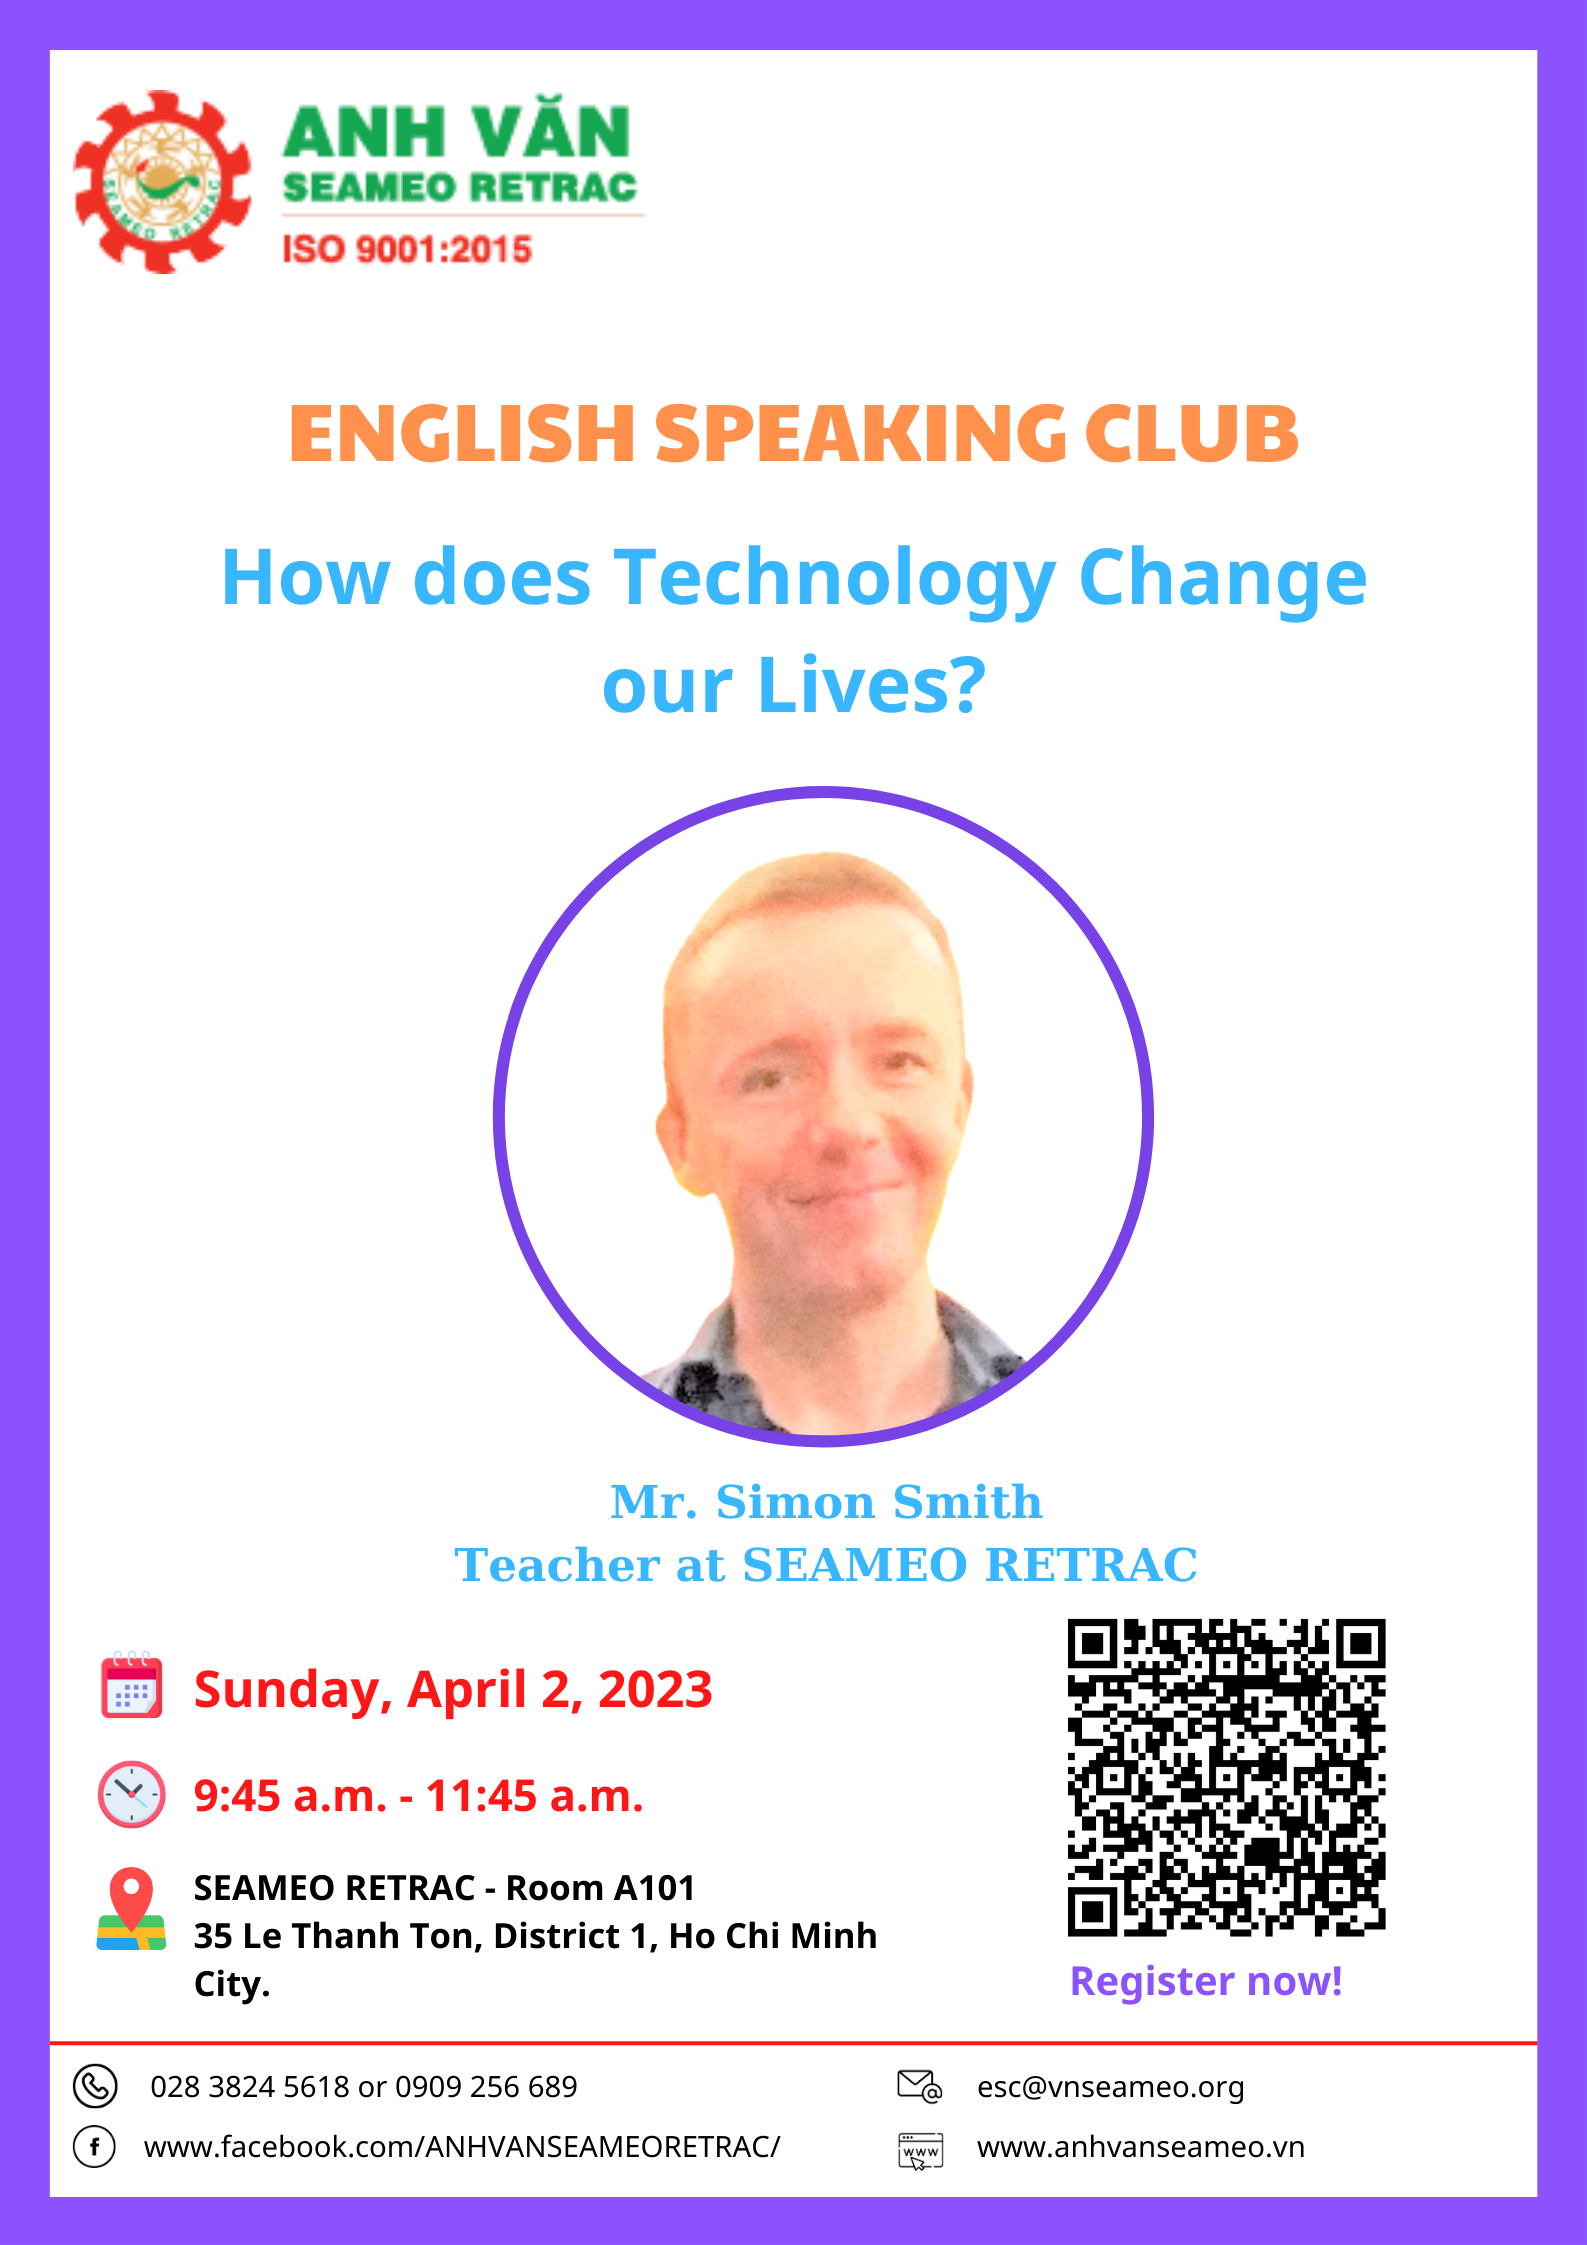 English Speaking Club titled “How does Technology Change our Lives?”